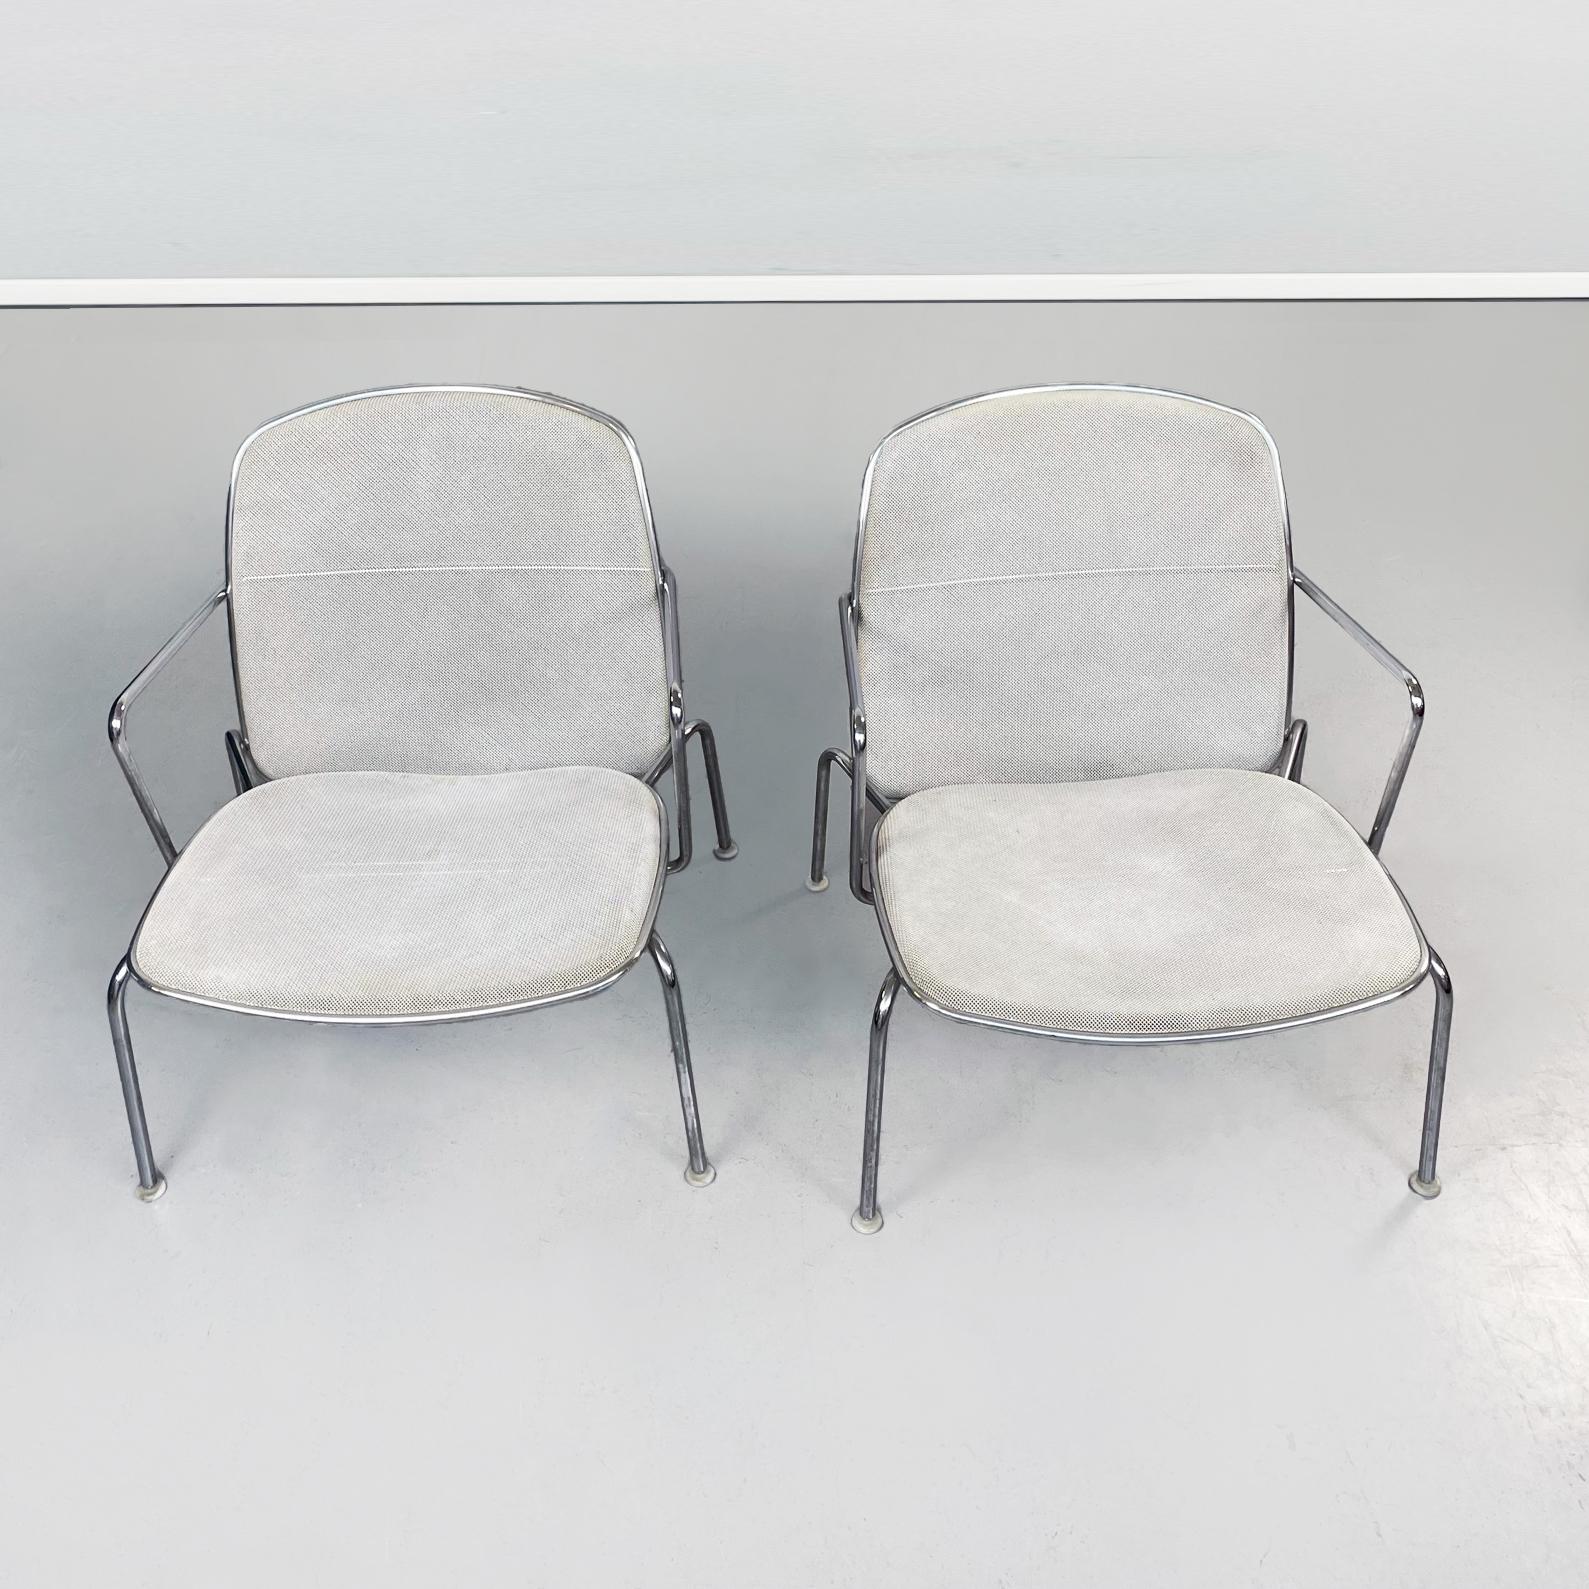 Italian 21st century White metal and steel Web armchairs by Citterio for B&B, 2000s
Pair of Web chairs in chromed steel. The rectangular backrest and seat with rounded corners are in white wire mesh. The structure is in tubular steel. White